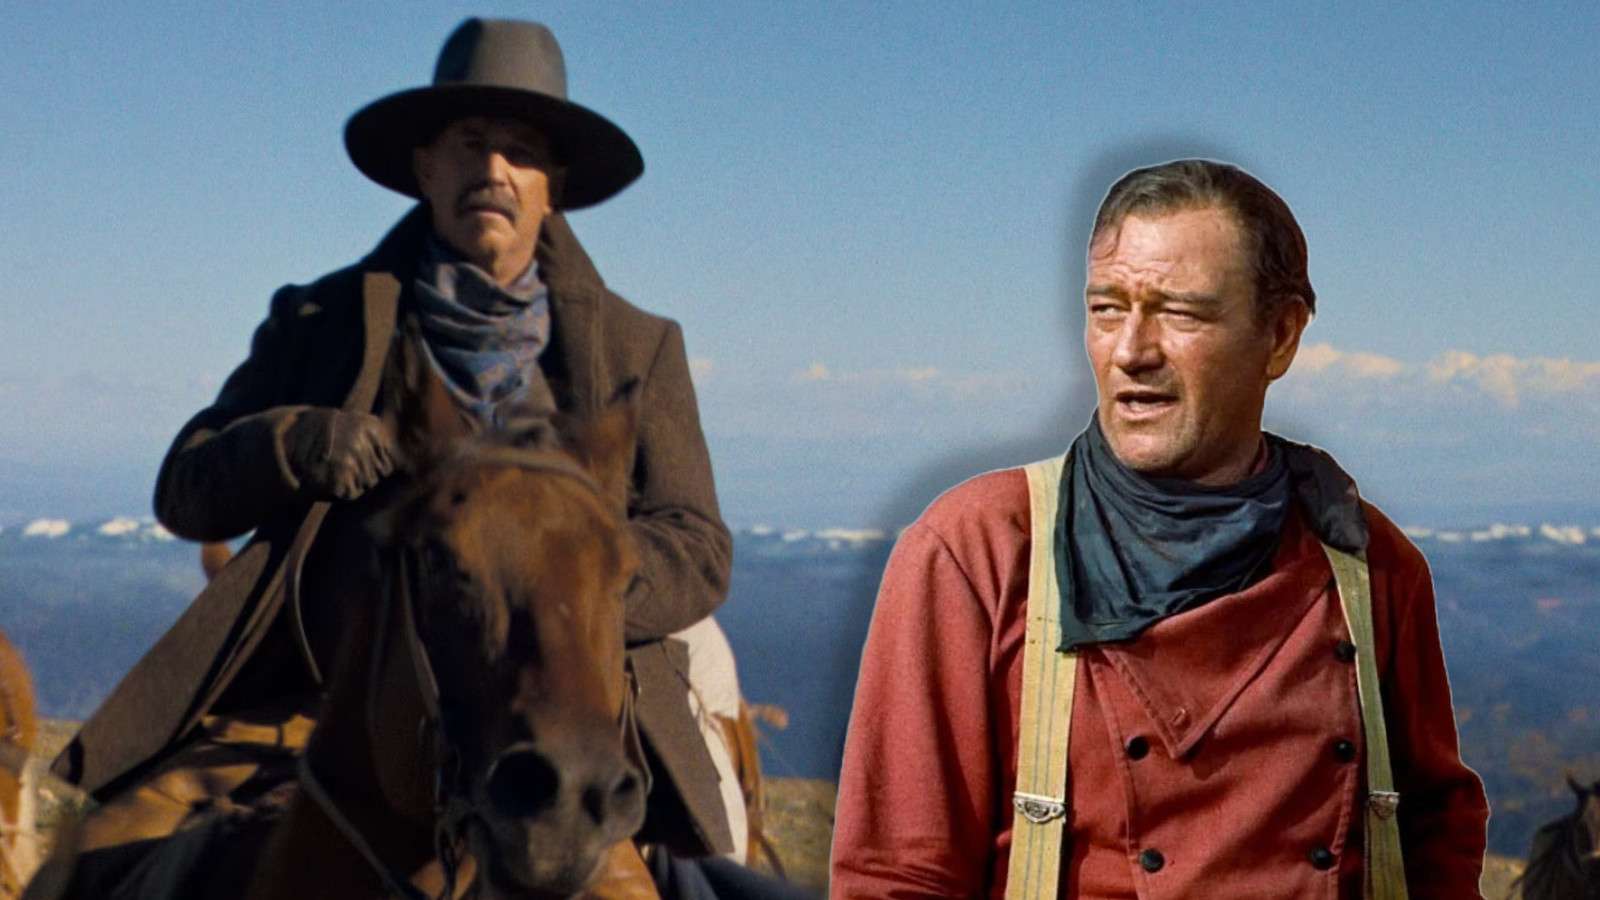 Kevin Costner in Horizon on a horse and John Wayne in The Searchers